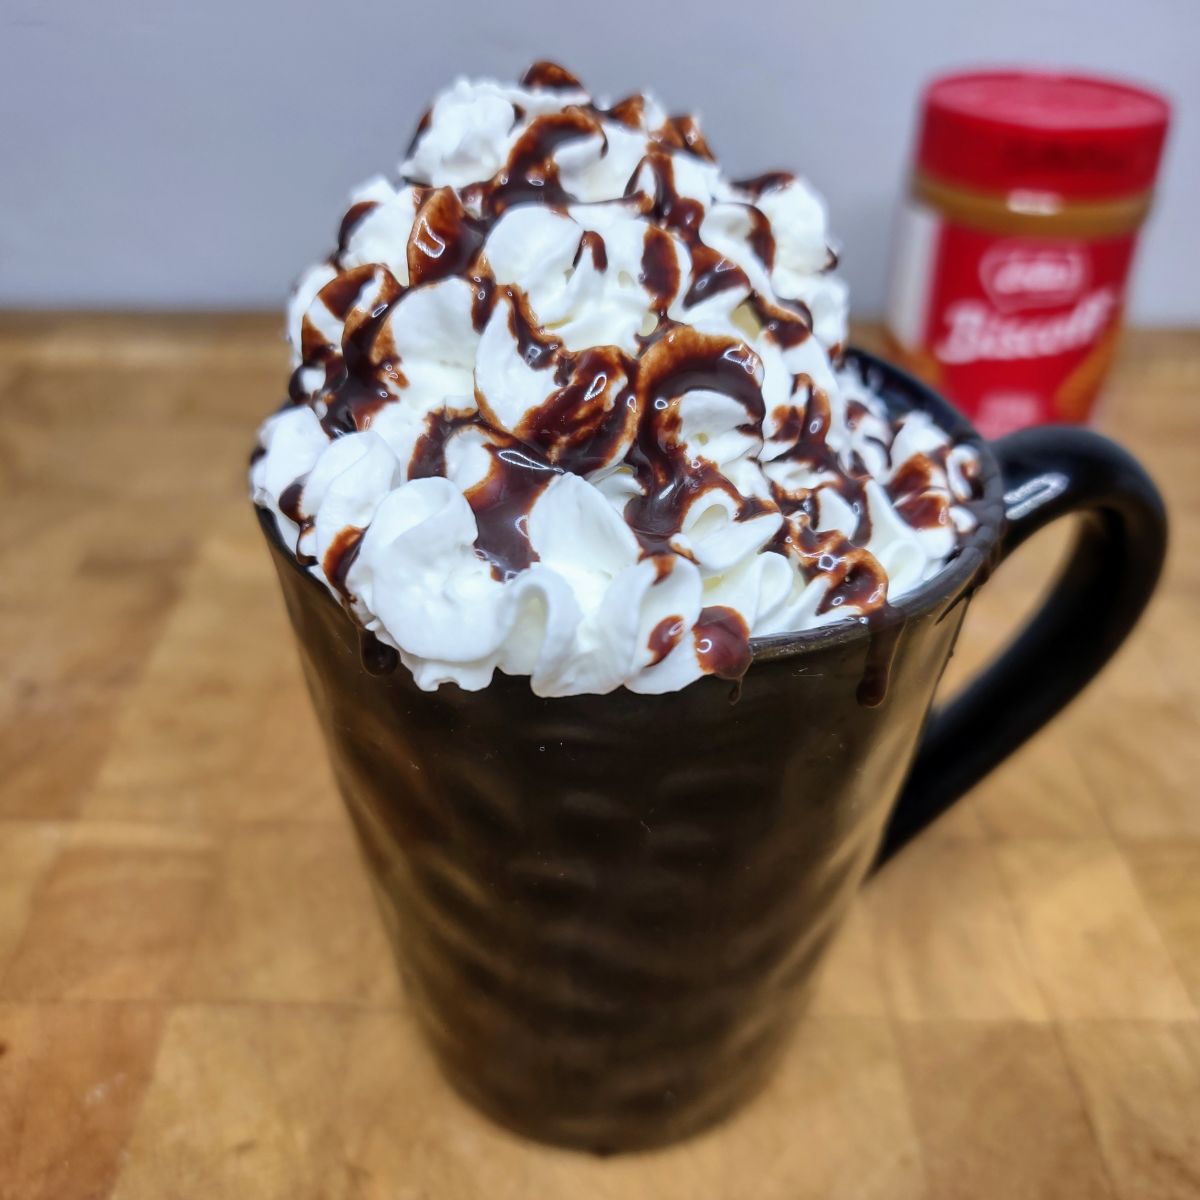 Biscoff hot chocolate in a mug topped with whipped cream and chocolate syrup and a container of biscoff spread in the background.